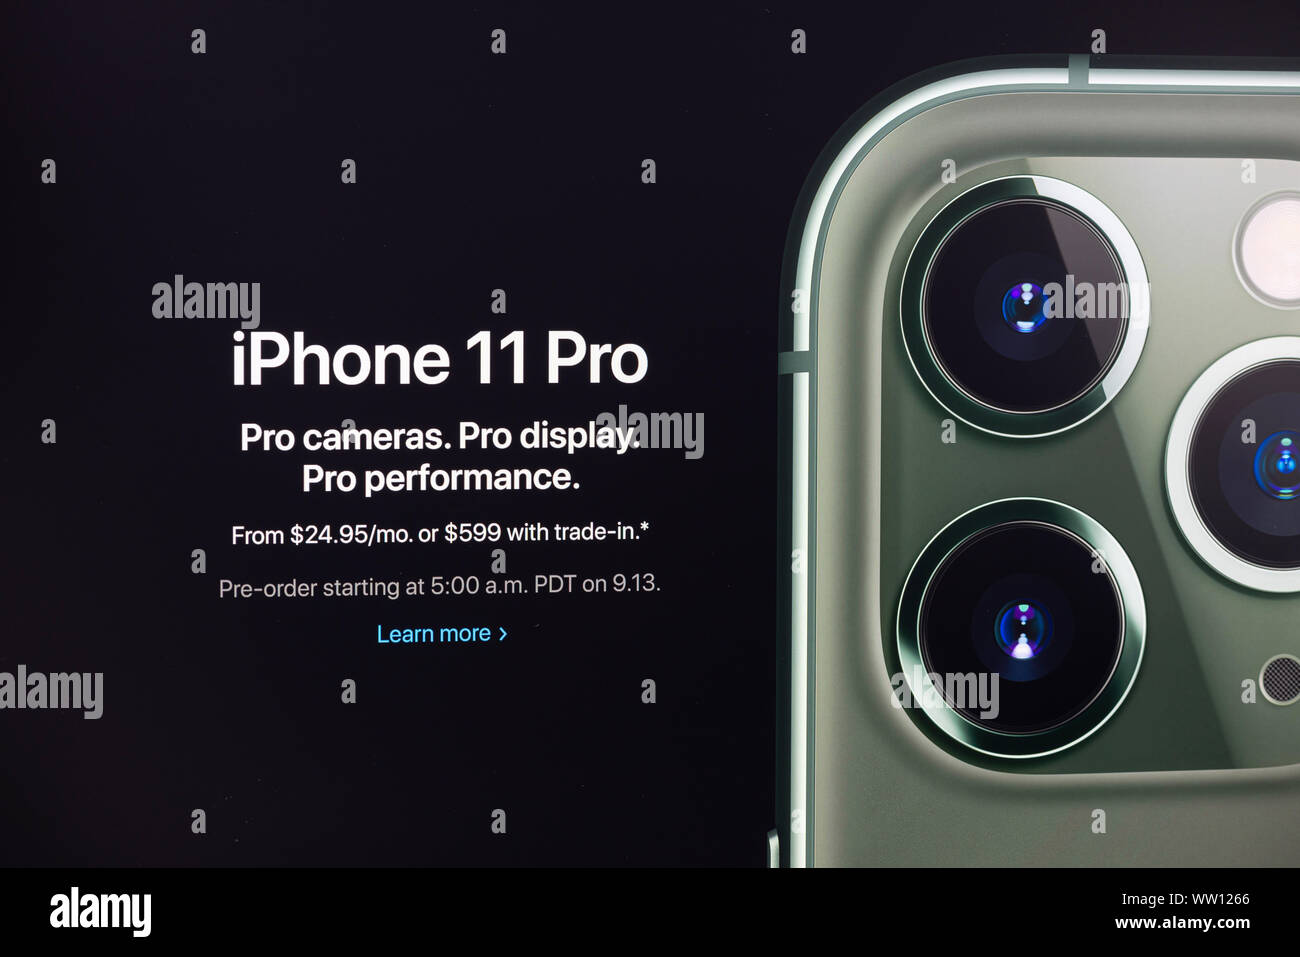 A shot from apple.com website about the Apple Inc. officially announced the iPhone 11 Pro at Apple Special Event. Stock Photo